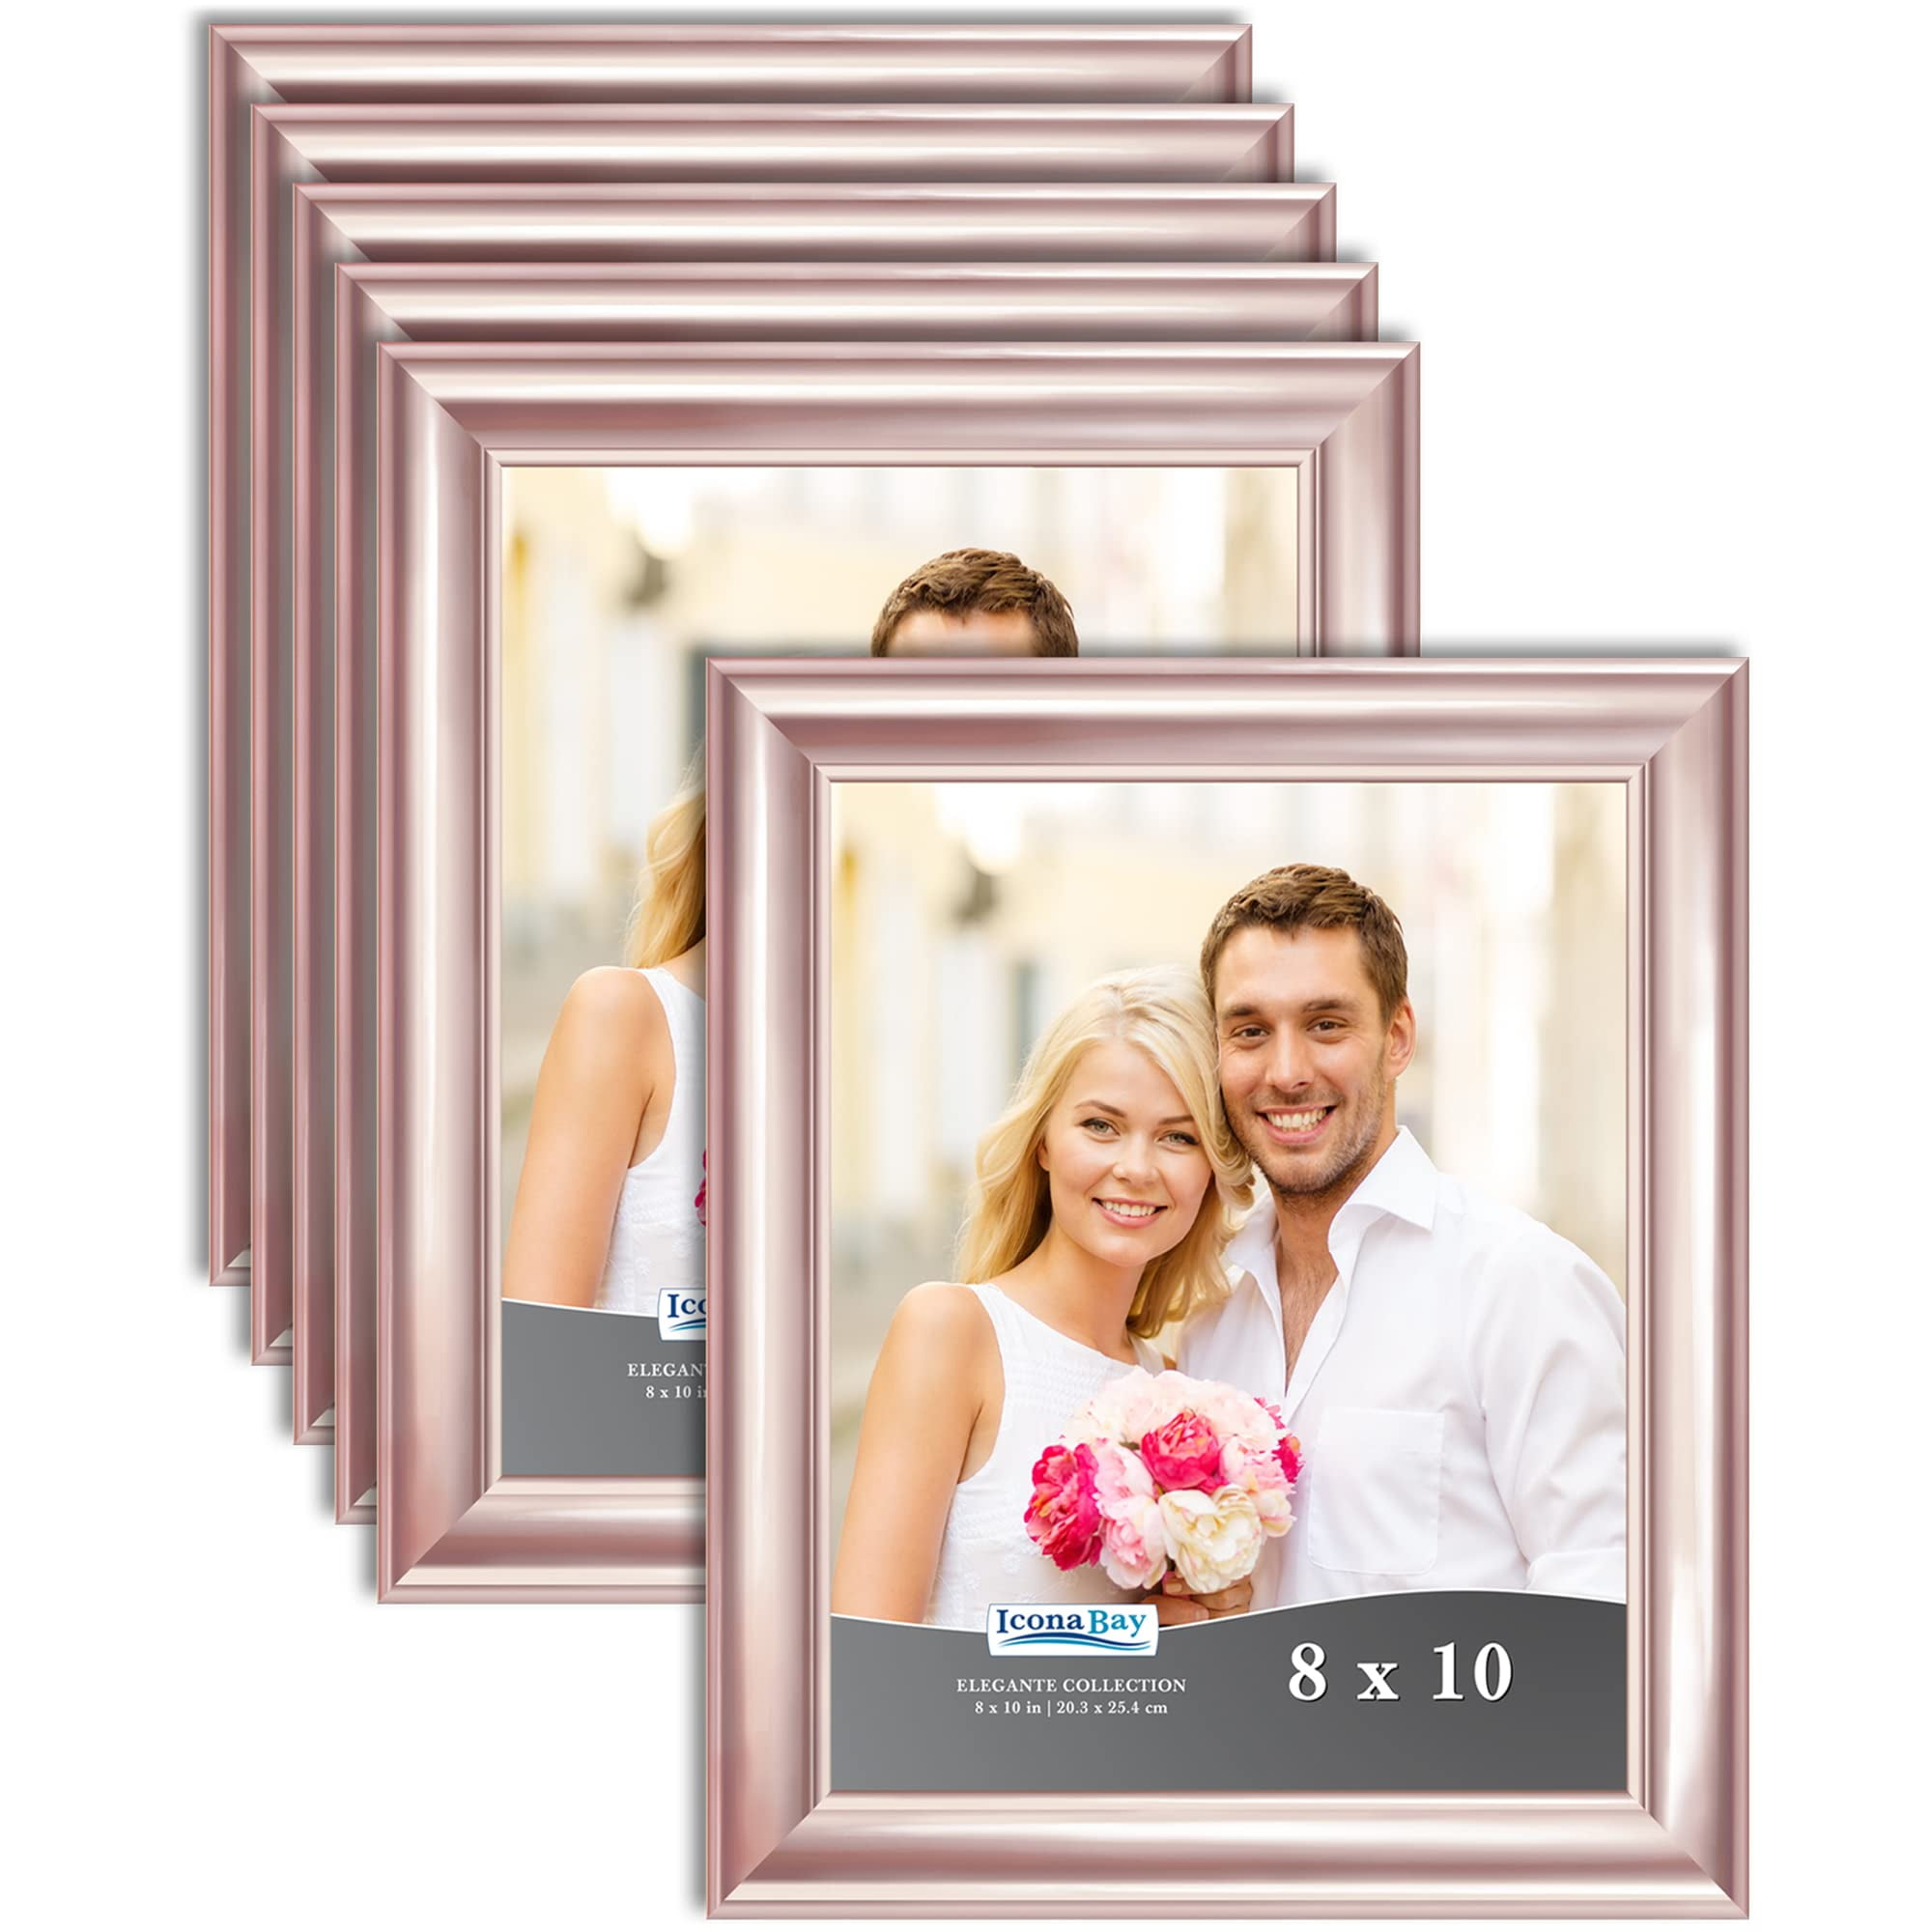 2 x Photo Frames 8in x 10in Family Home Decor Love Gold Silver Rose Gold 20 x 25 